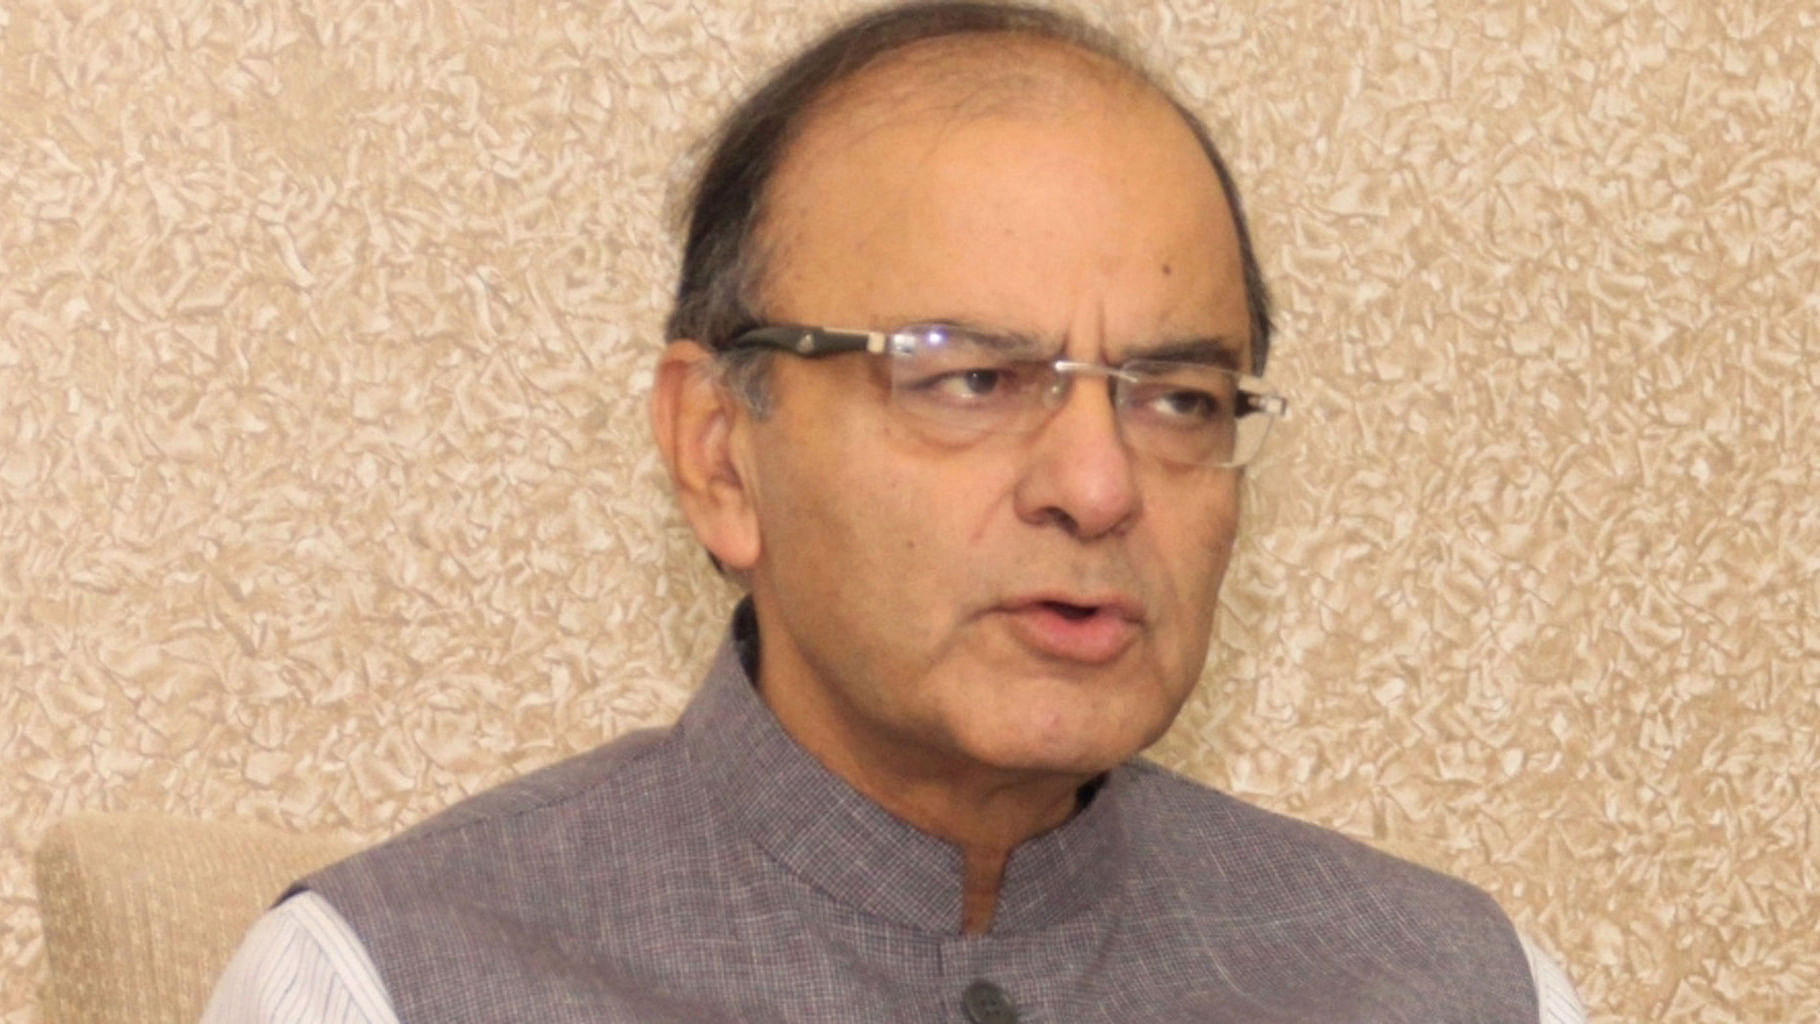 Union Minister for Finance, Corporate Affairs, and Information and Broadcasting and BJP leader Arun Jaitley. (Photo: IANS)&nbsp;